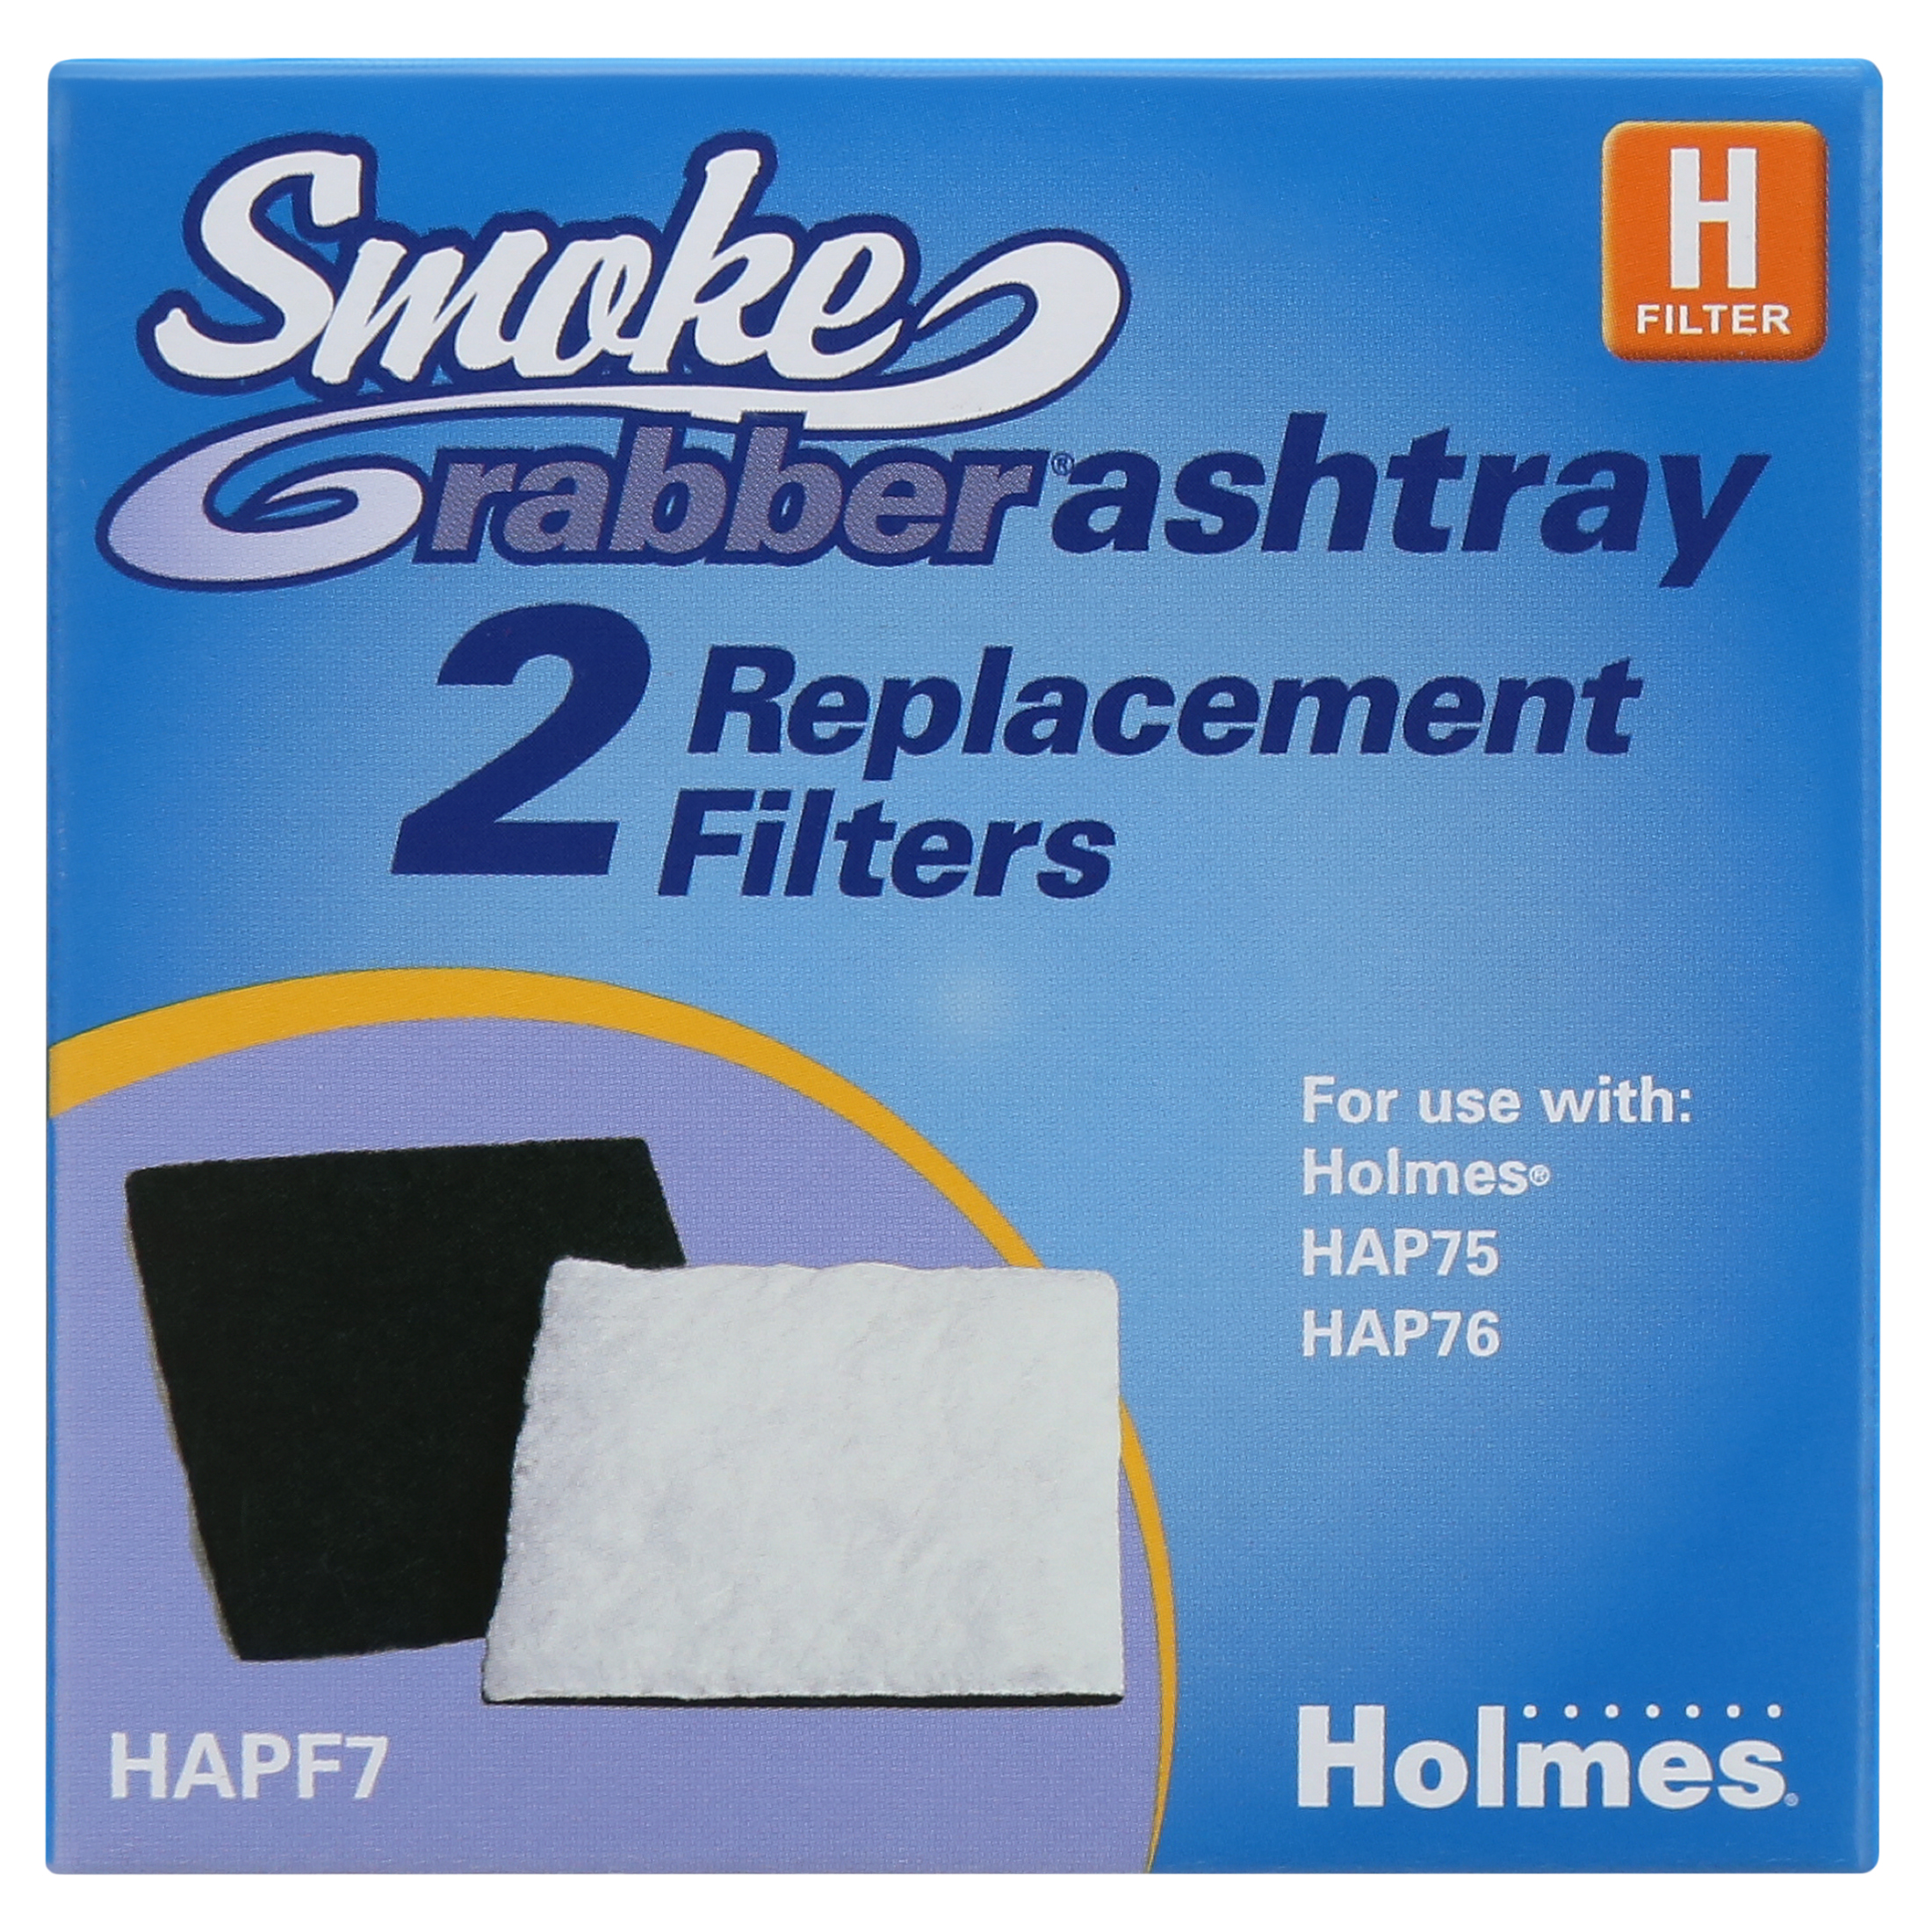 Holmes Smoke Grabber Ashtray Air Filter Replacement - image 4 of 6